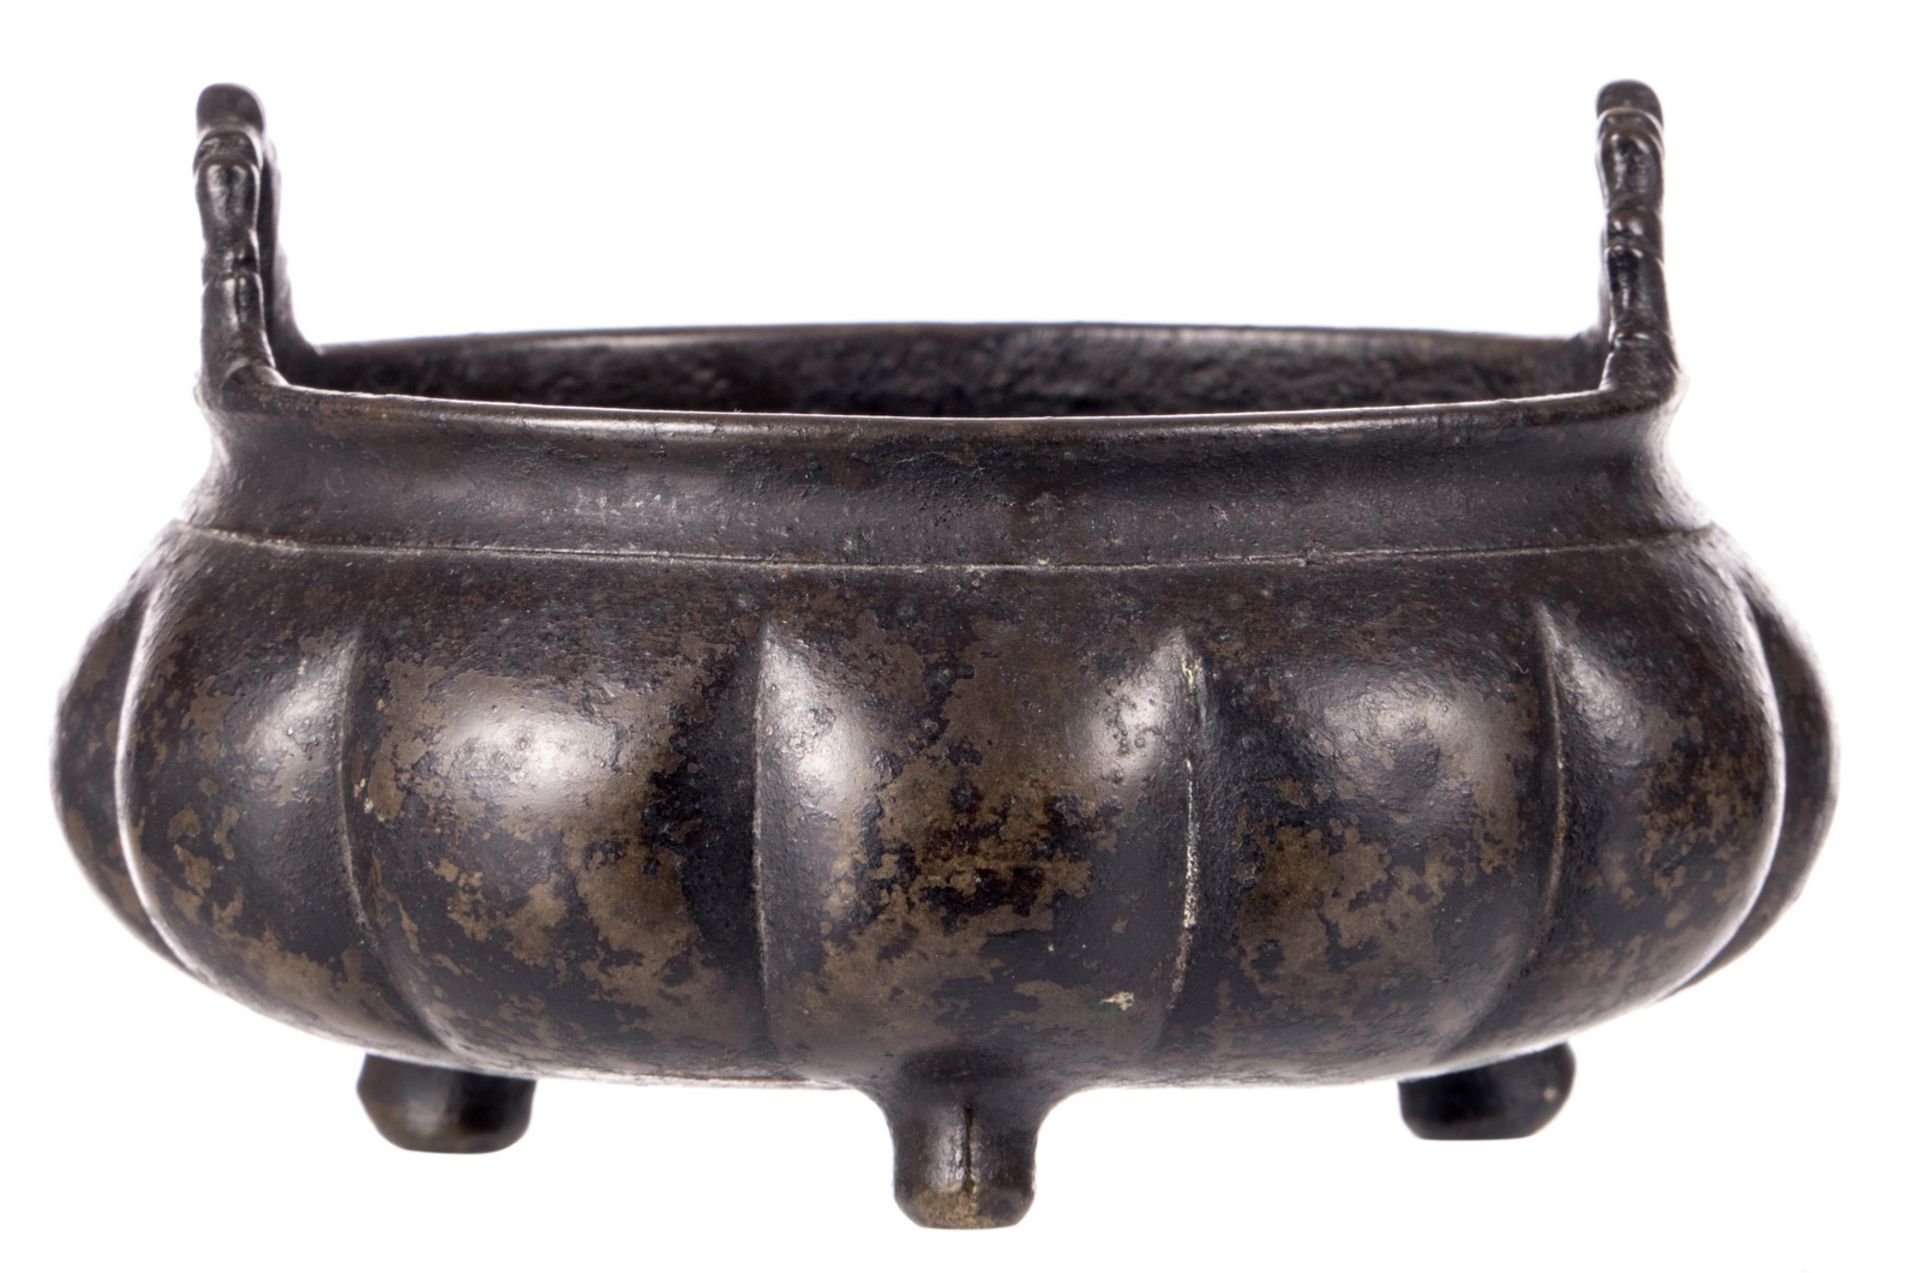 A Chinese bronze incense burner, with a Xuande mark, H 8 - D 10,5 cm